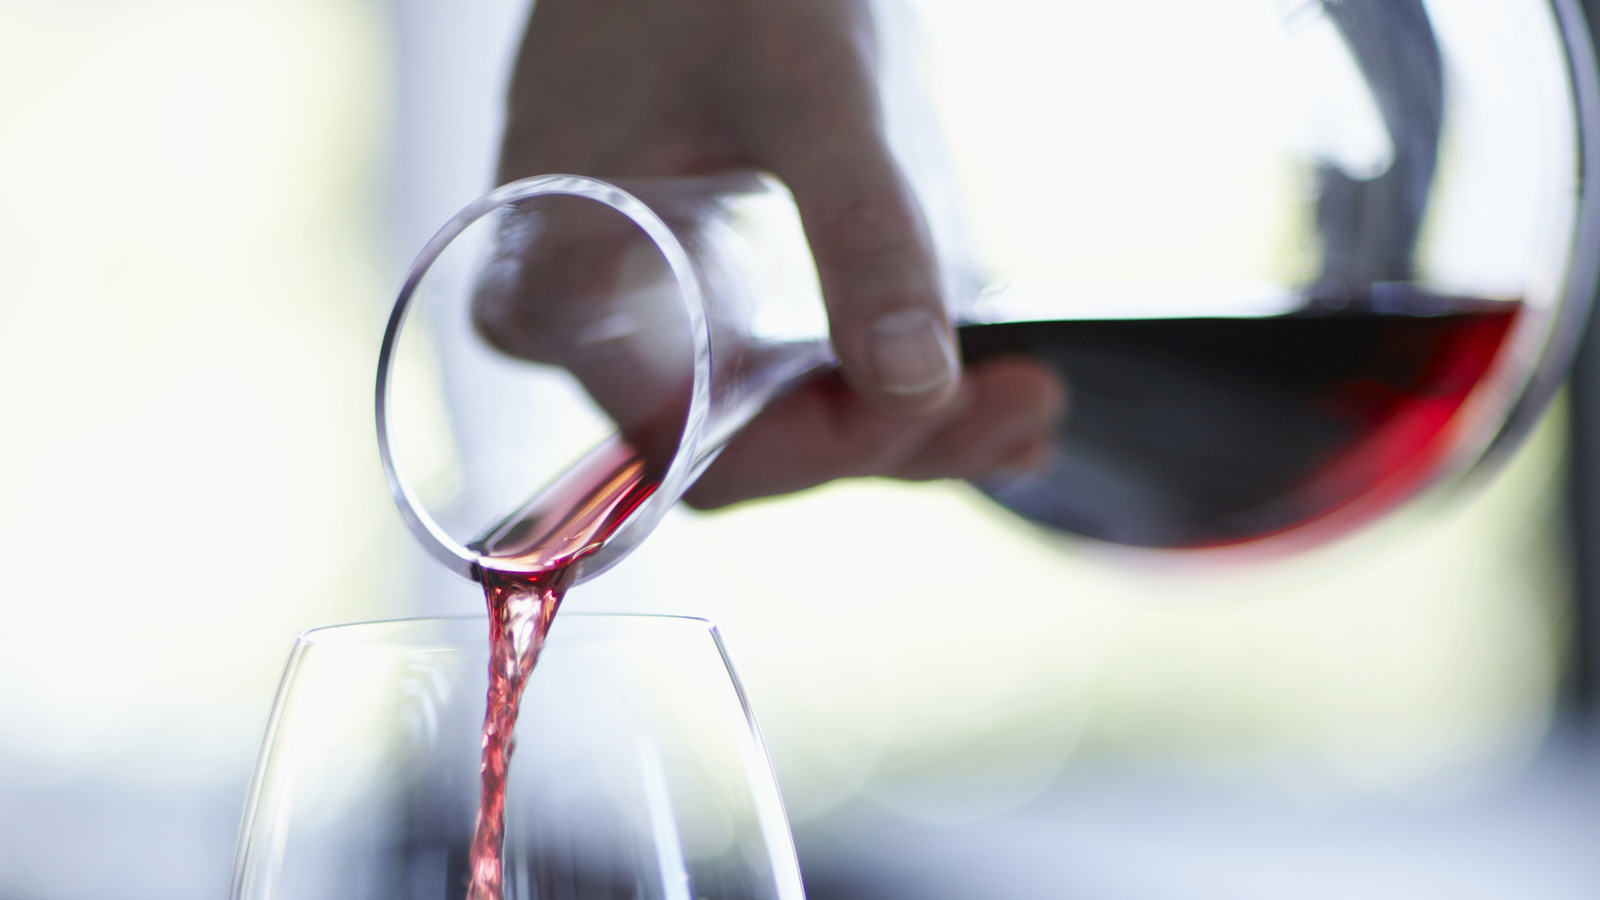 Here's The Best Way To Clean That Dirty Wine Decanter